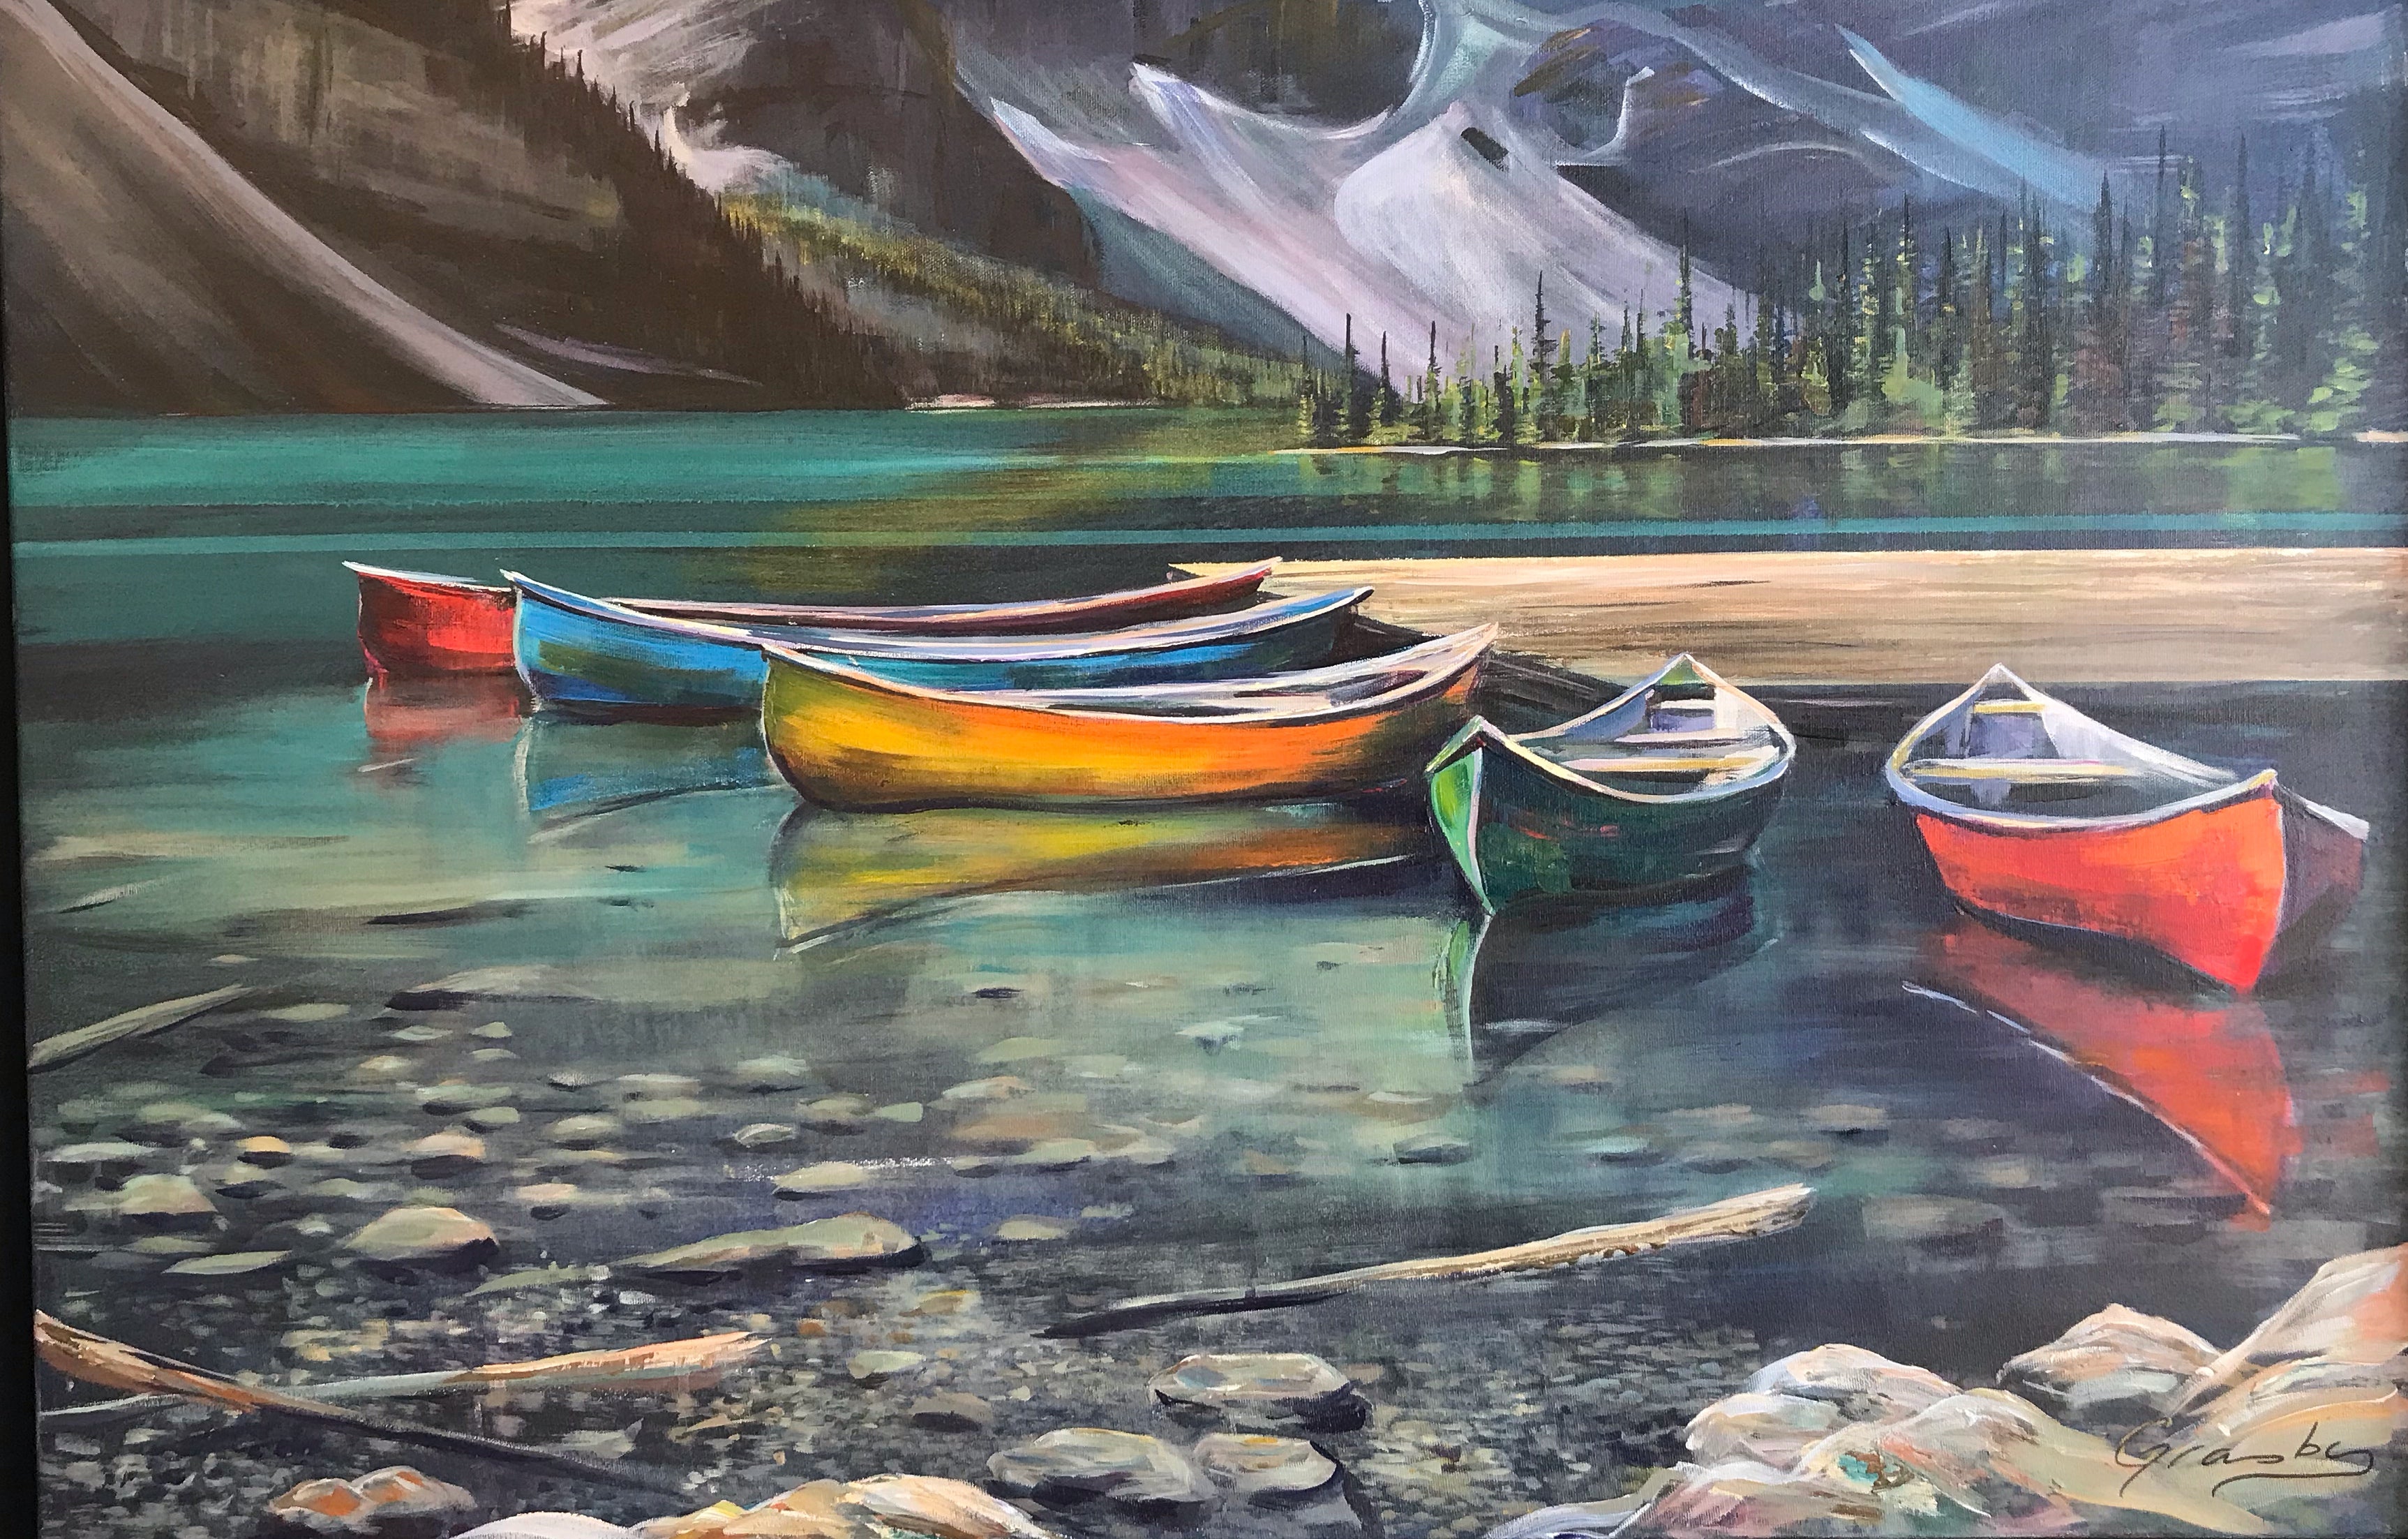 WORKSHOP - CANOES AND REFLECTIONS